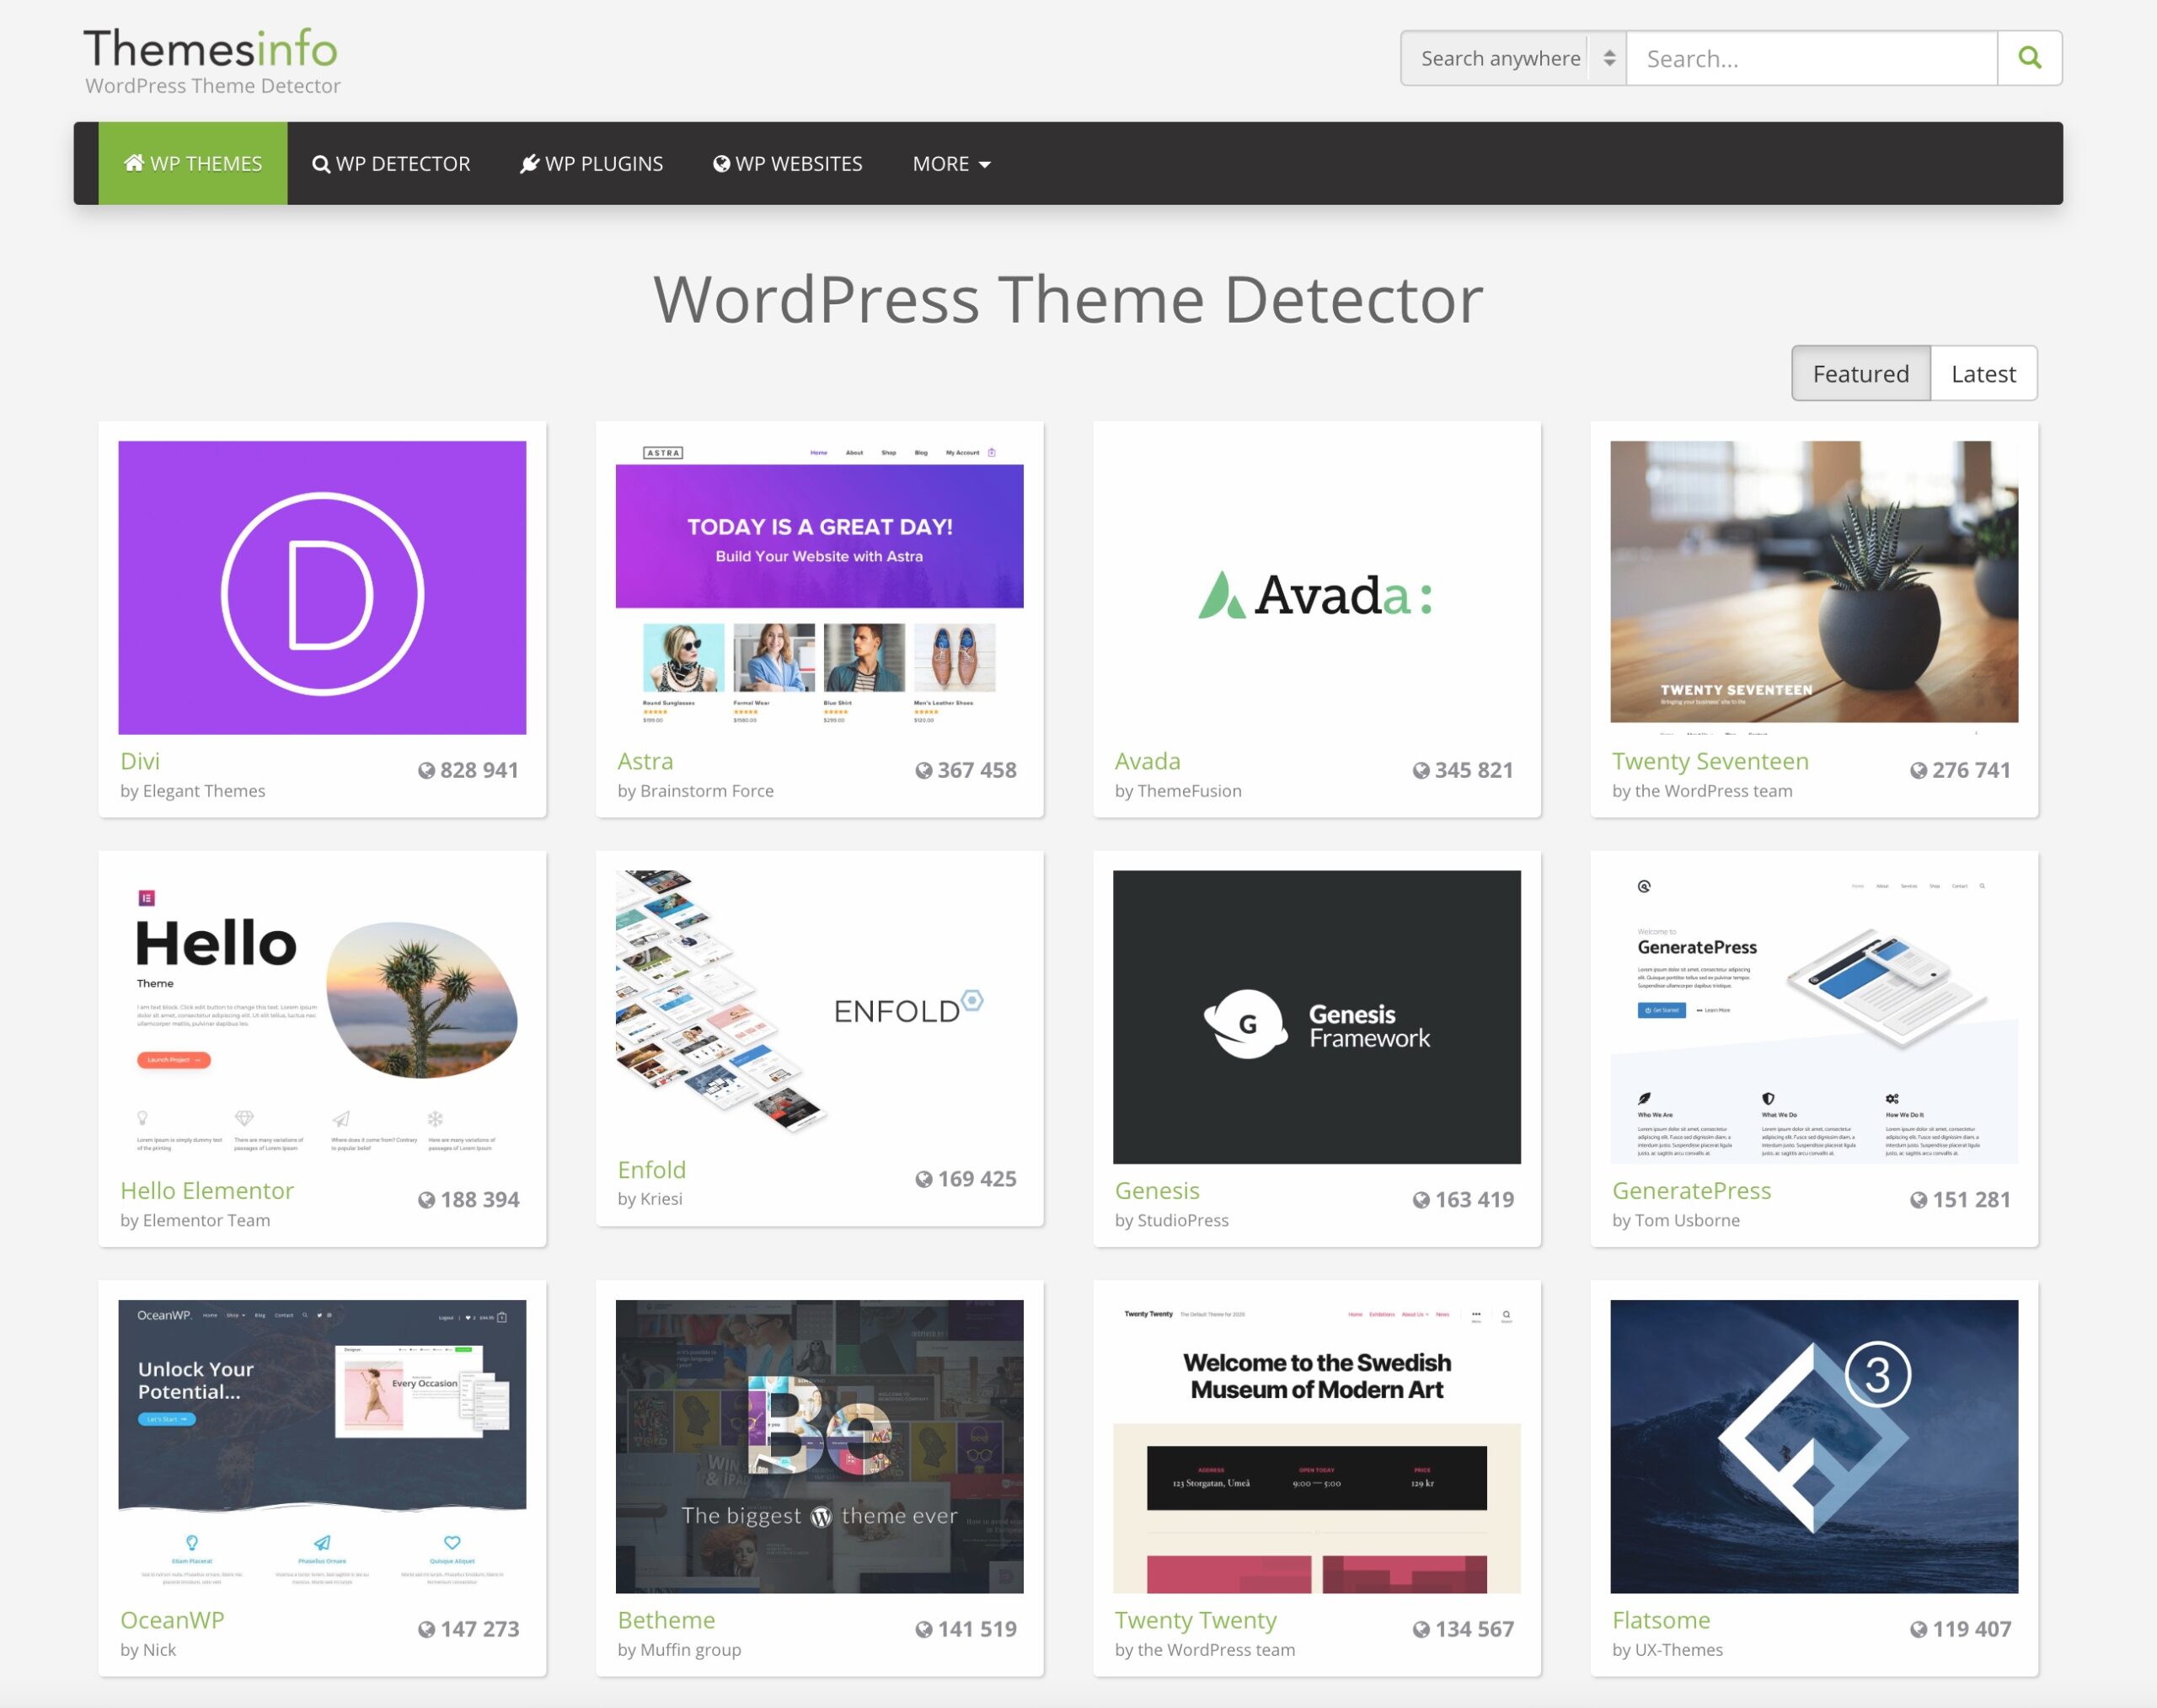 Why Do You Need a WordPress Theme Detector?